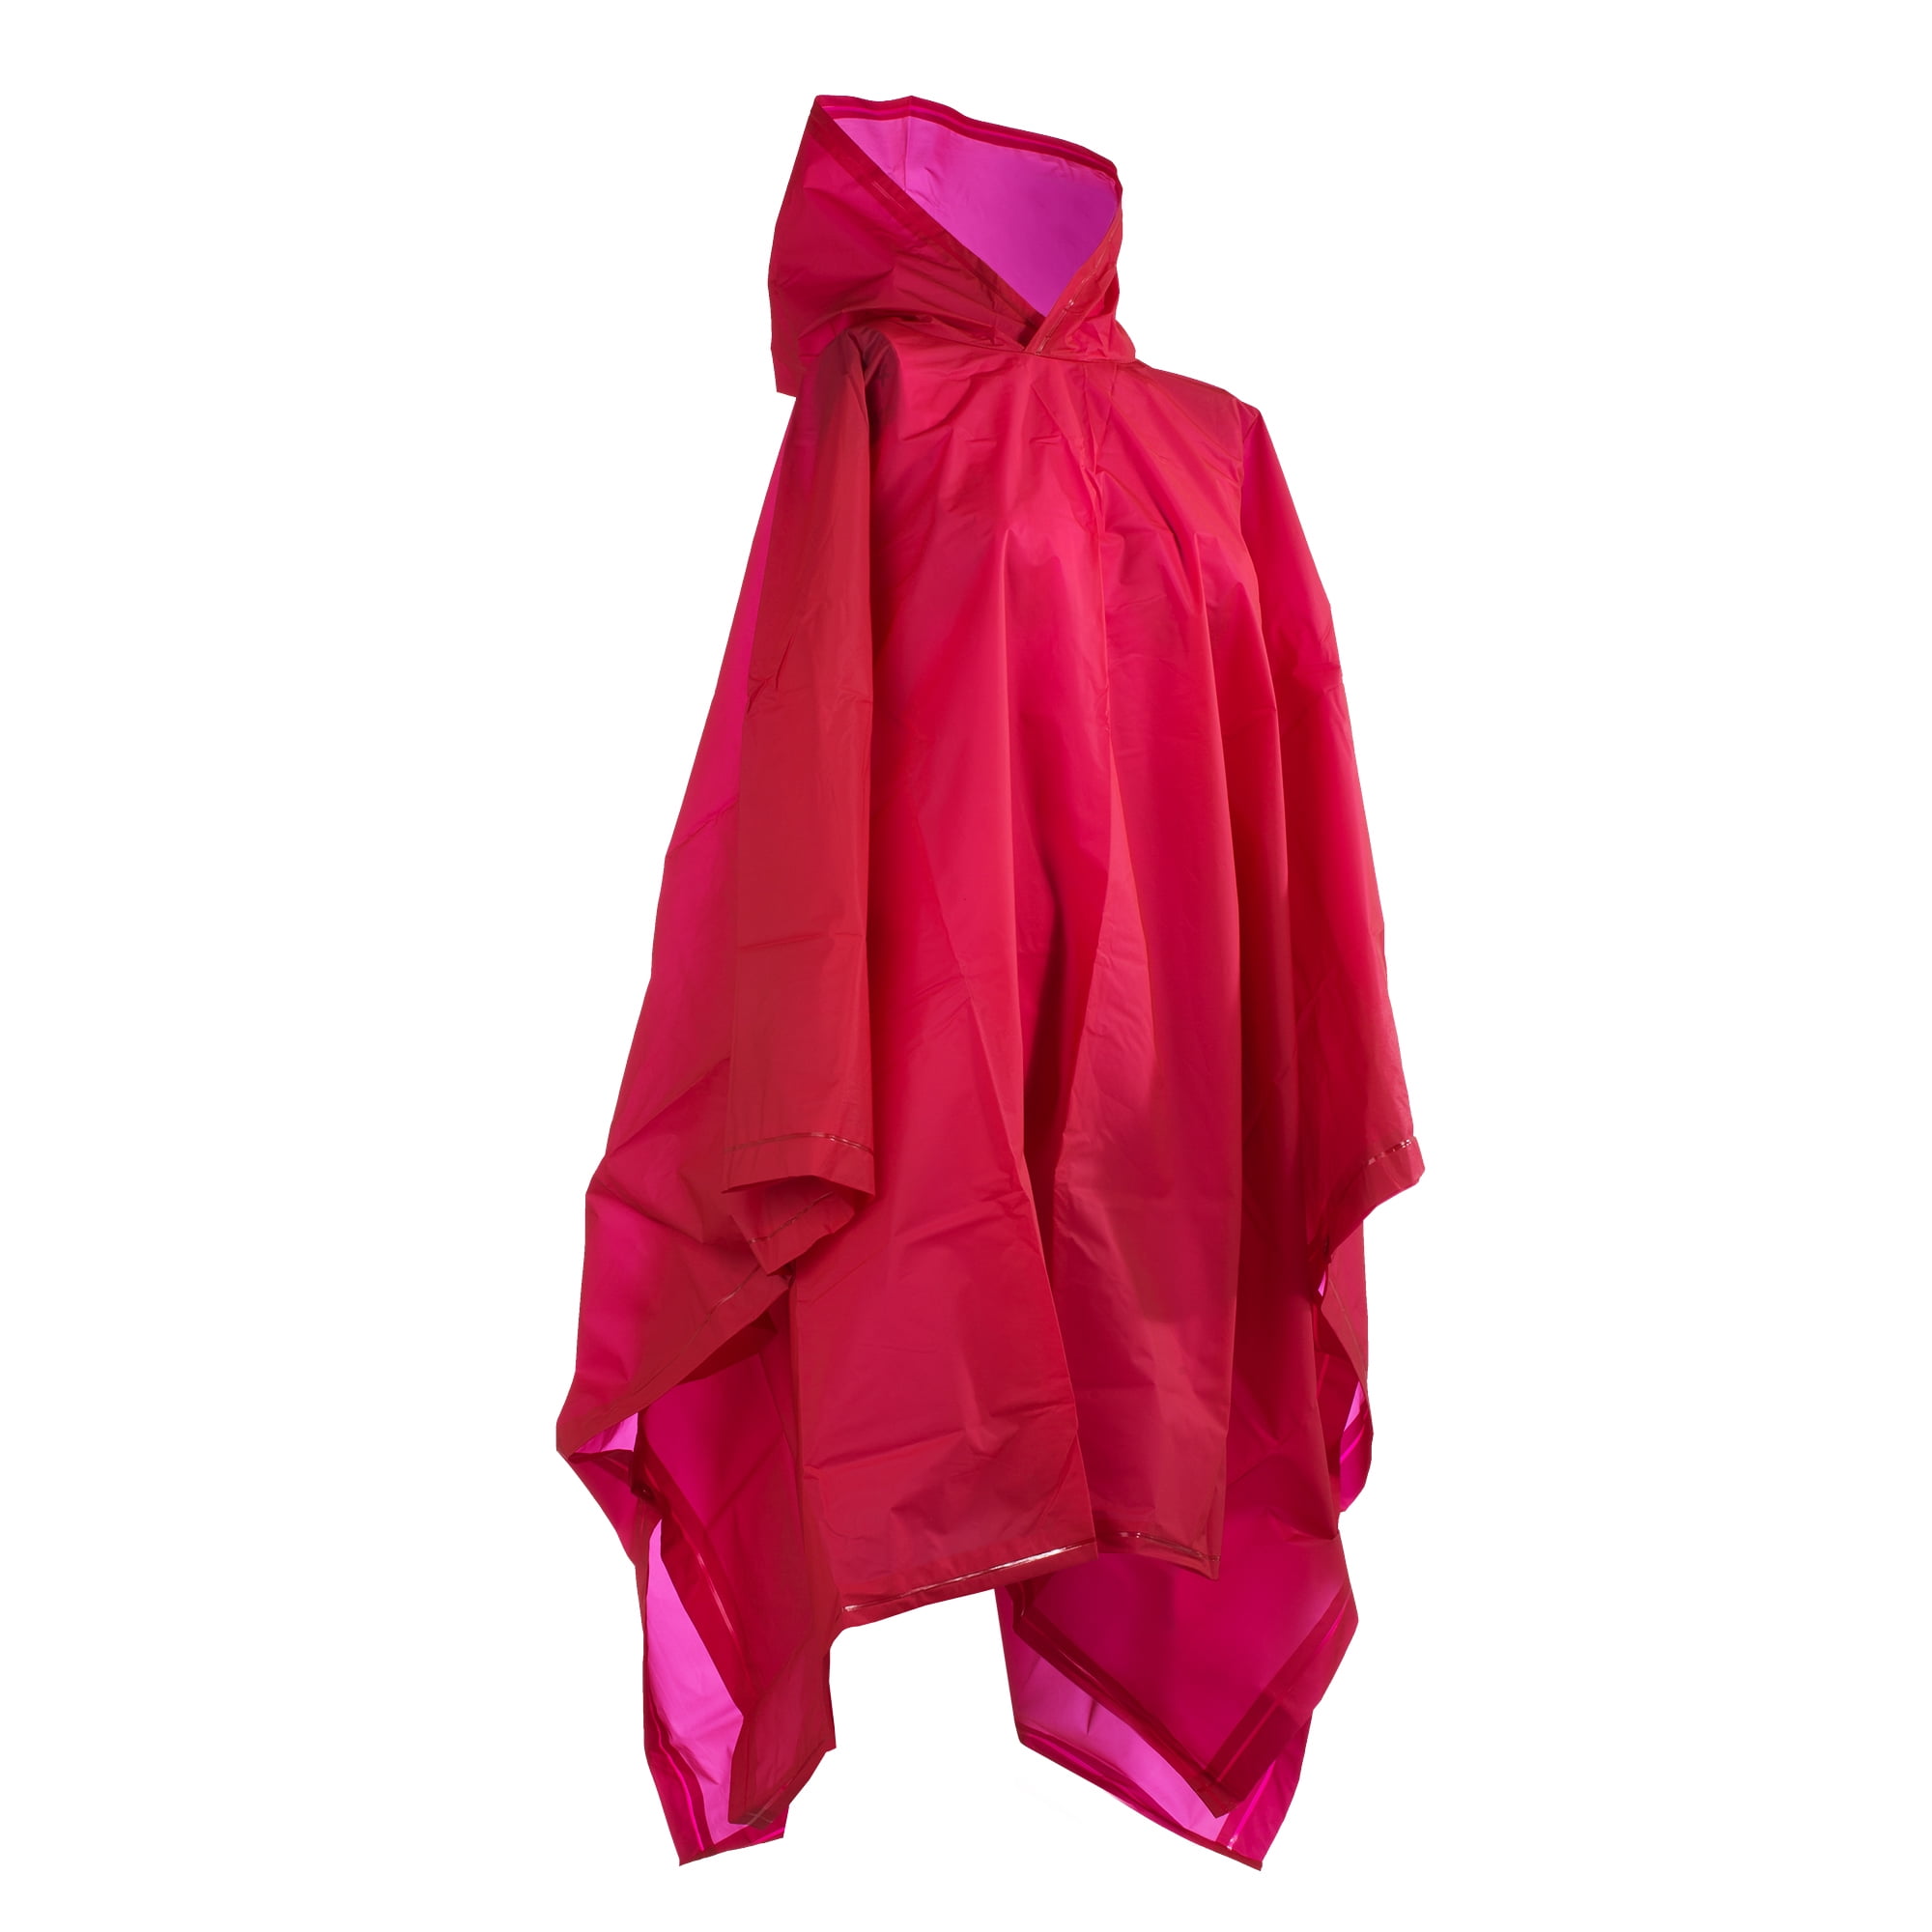 By totes Unisex Rain Poncho, Lightweight, Reusable, and packable